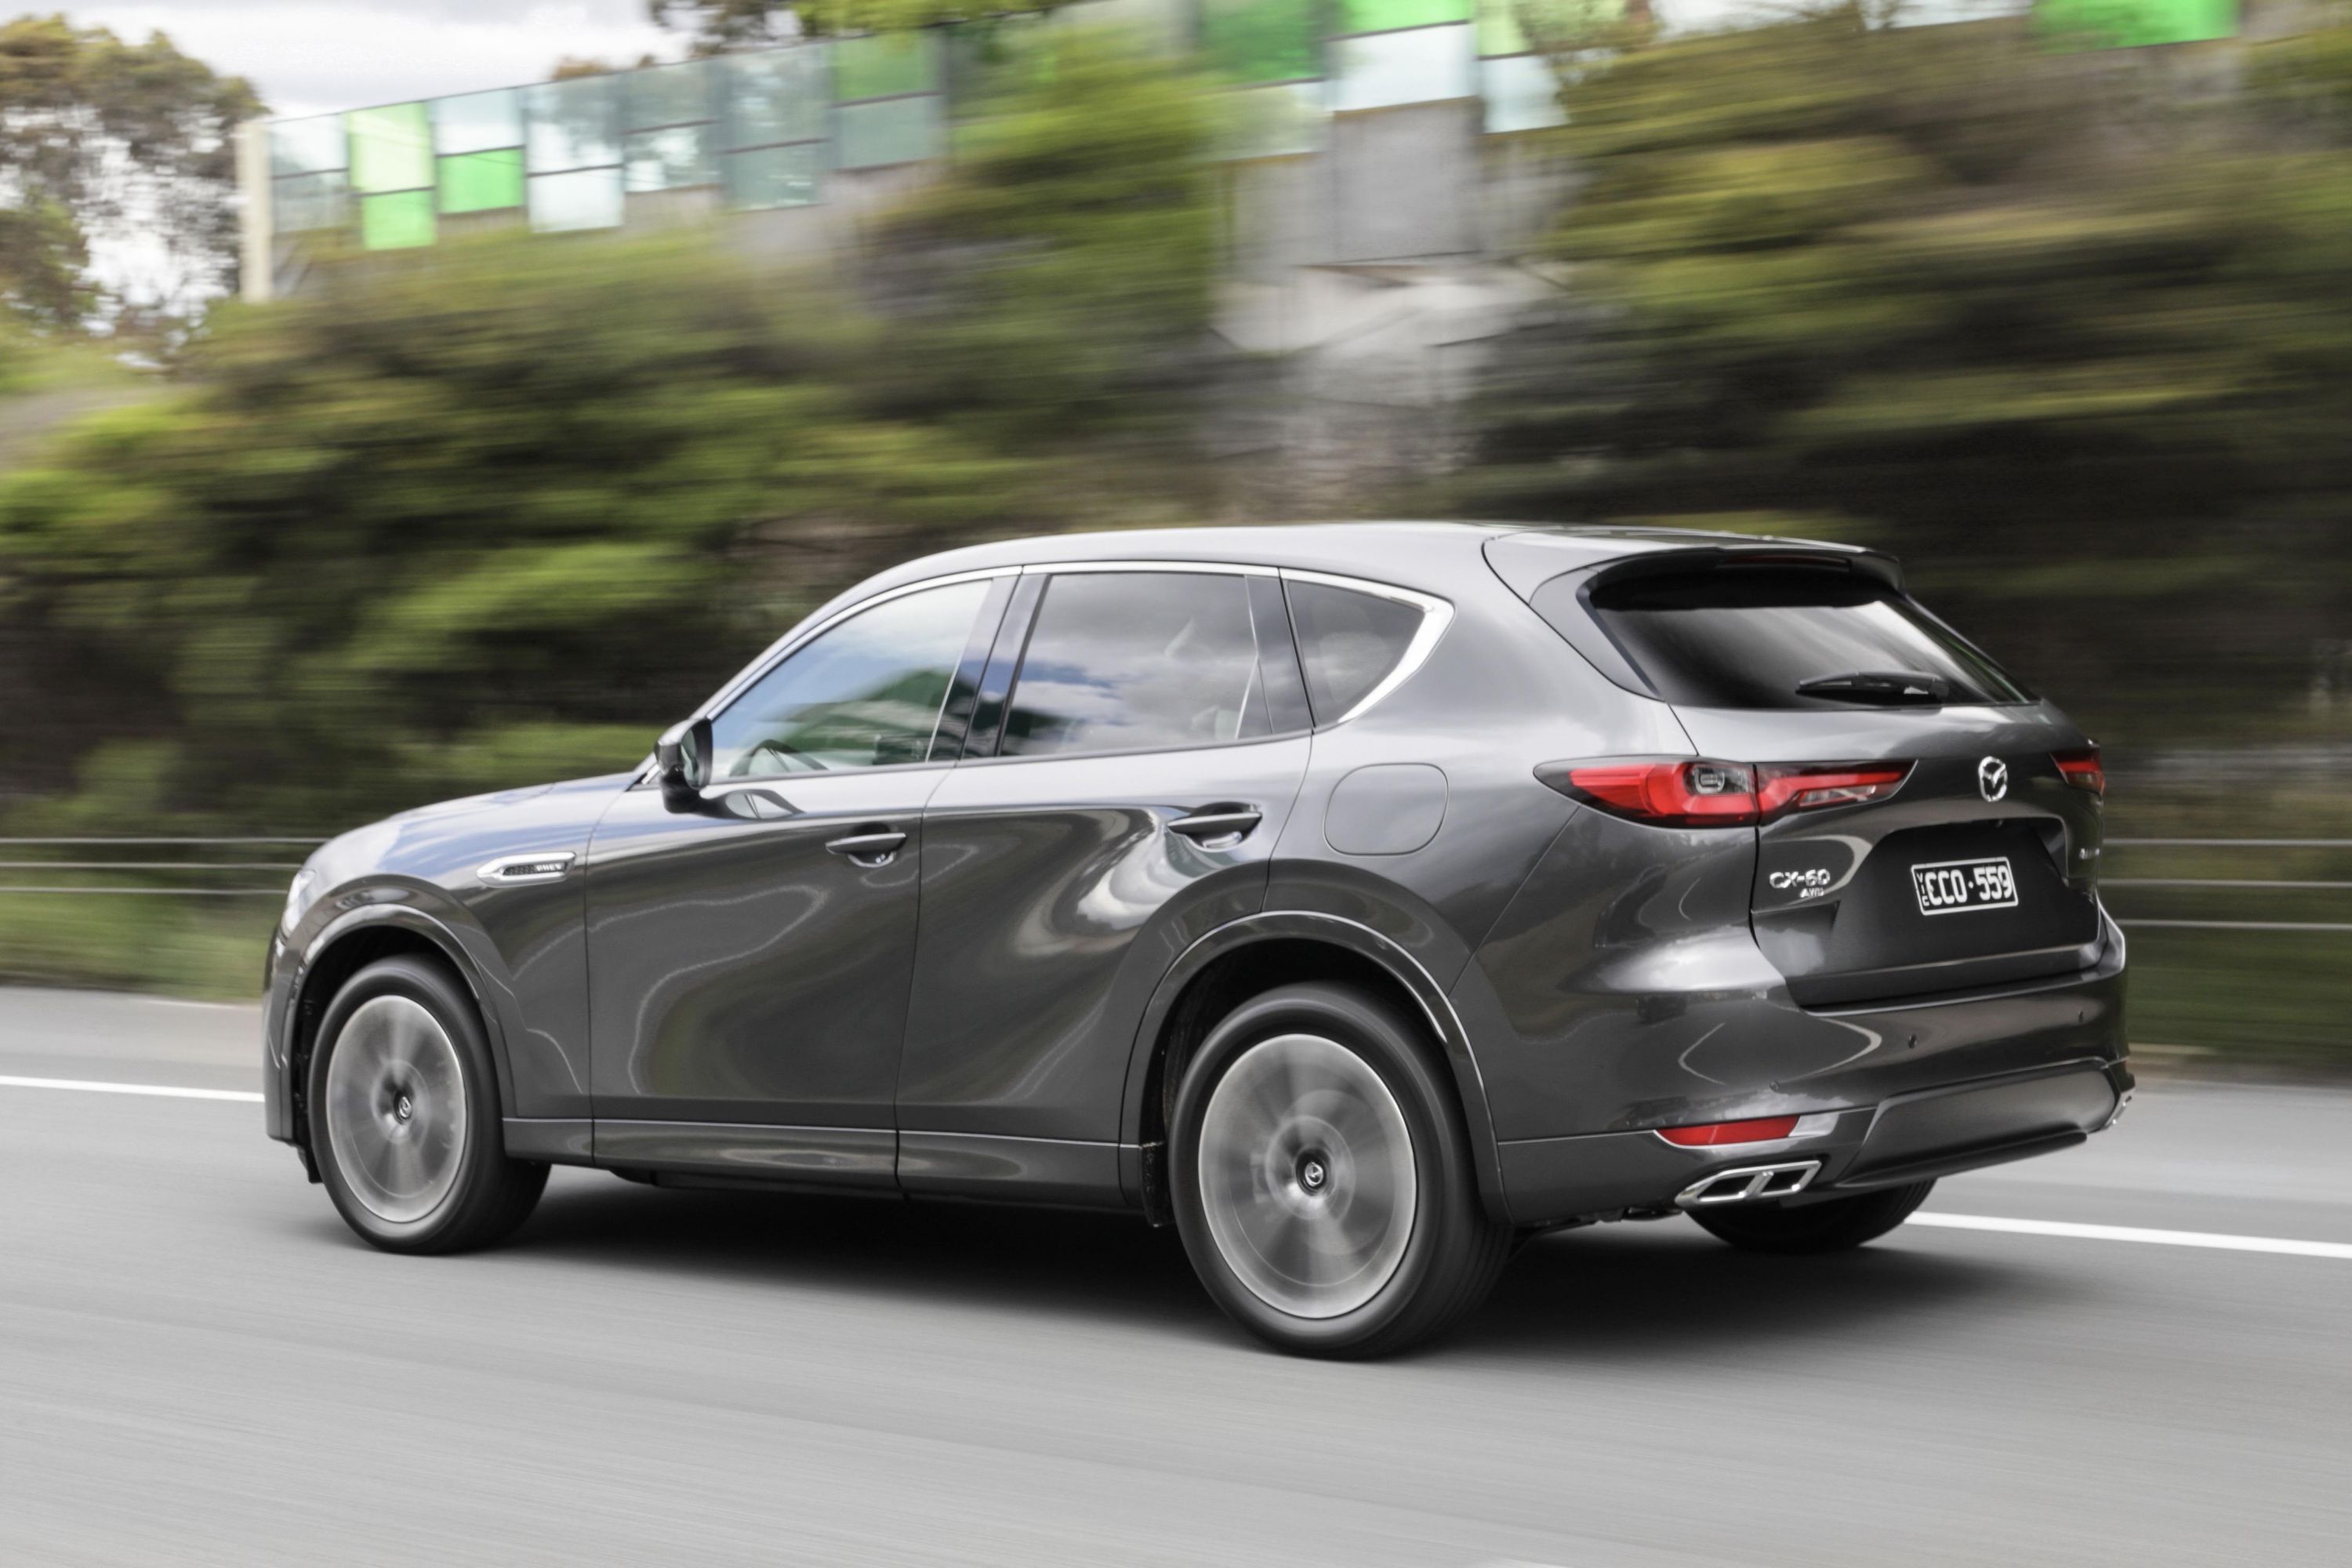 Mazda CX-60 2024 Specification - All Details & Features